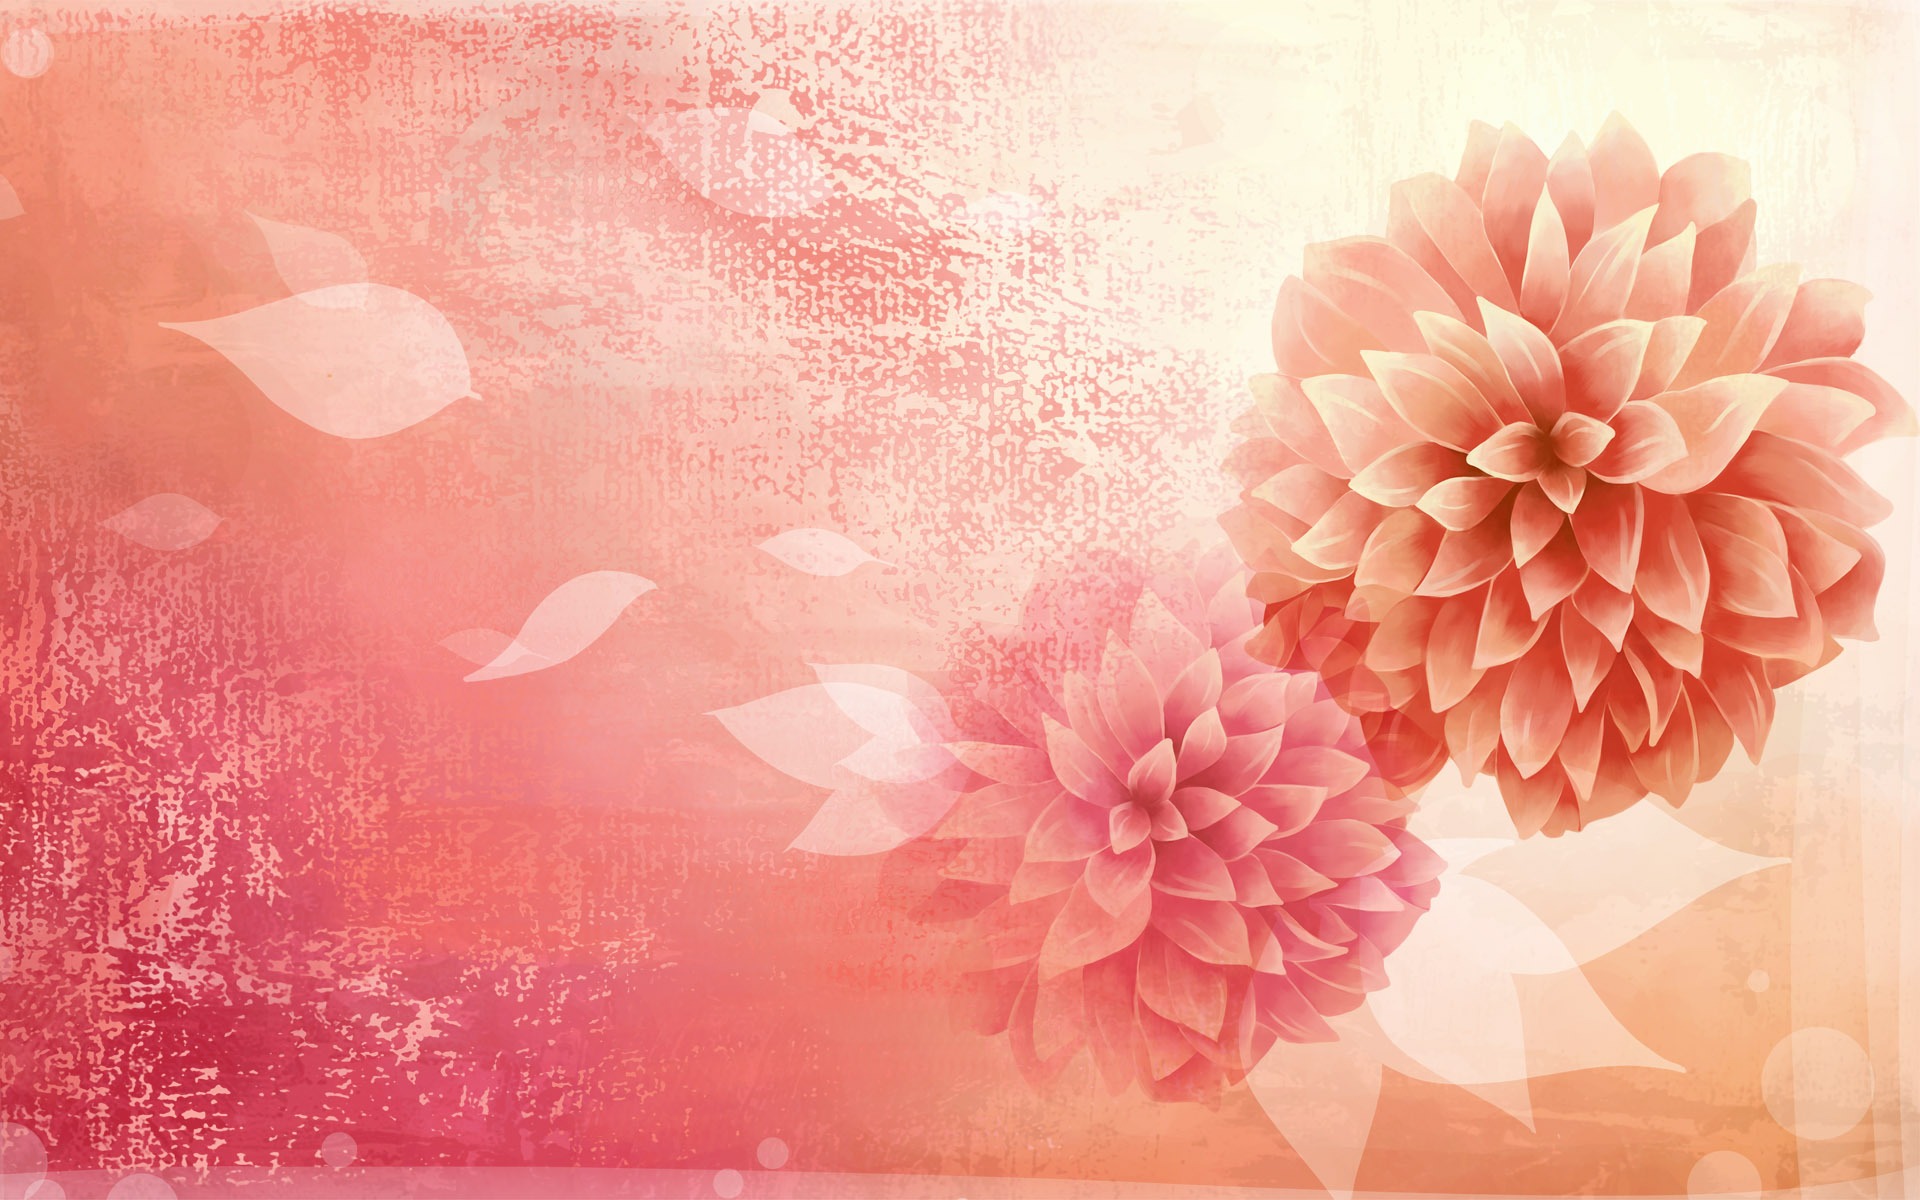 Synthetic Wallpaper Colorful Flower #22 - 1920x1200